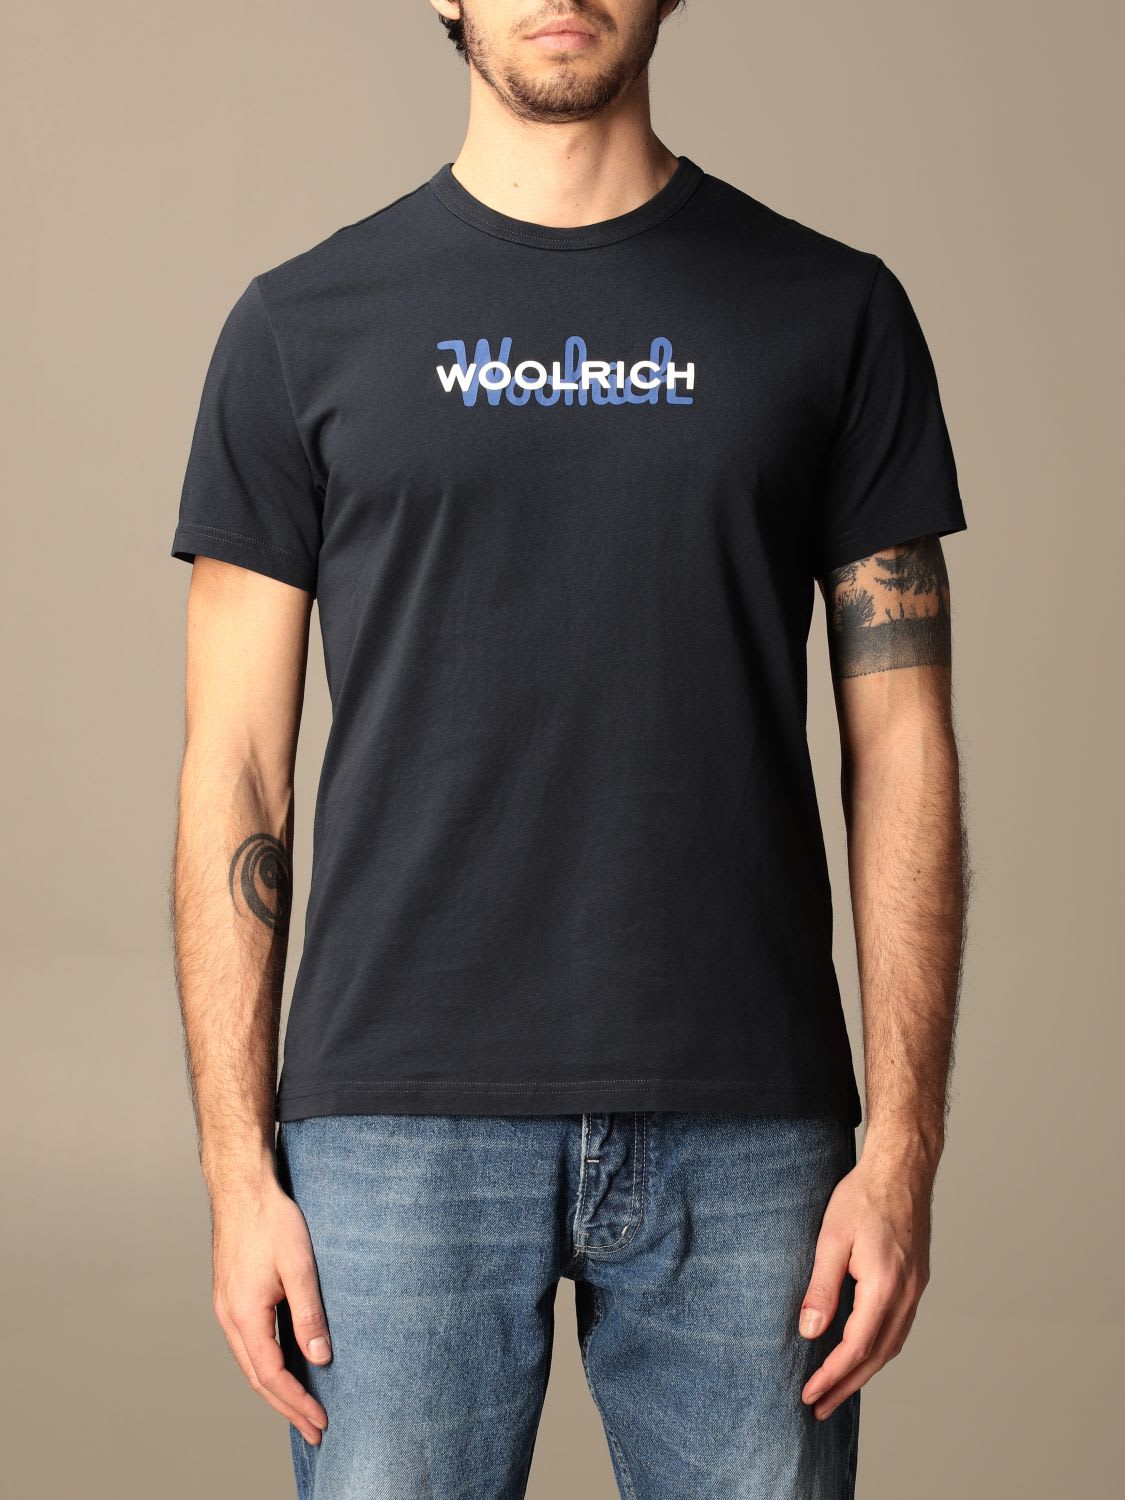 WOOLRICH COTTON T-SHIRT WITH LOGO,WOTE0048MR UT1486 3989